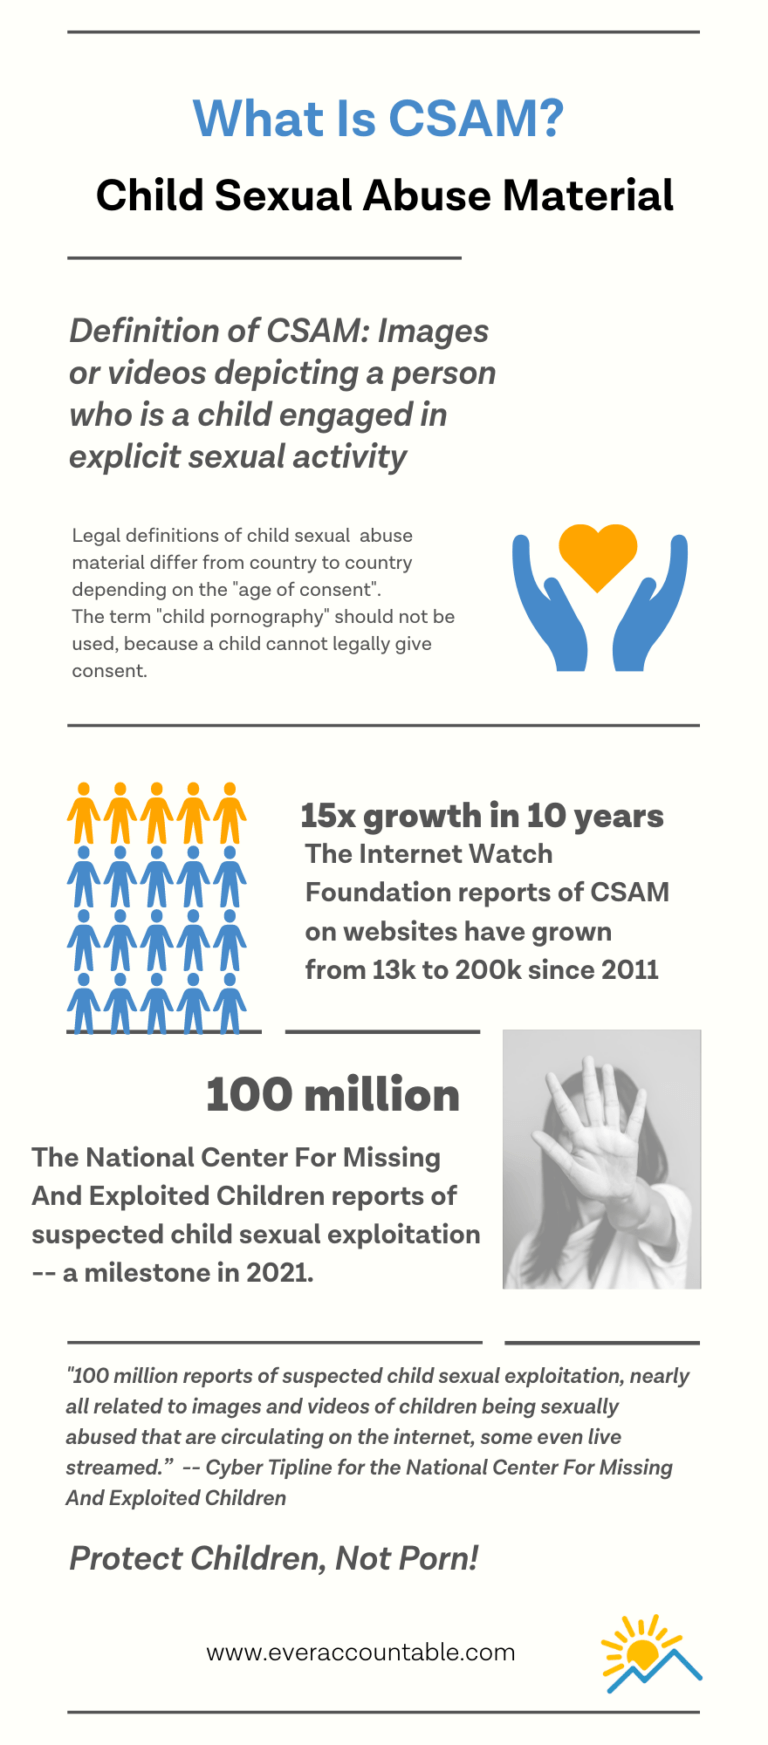 Child Sexual Abuse Material Infographic www.everaccountable.com